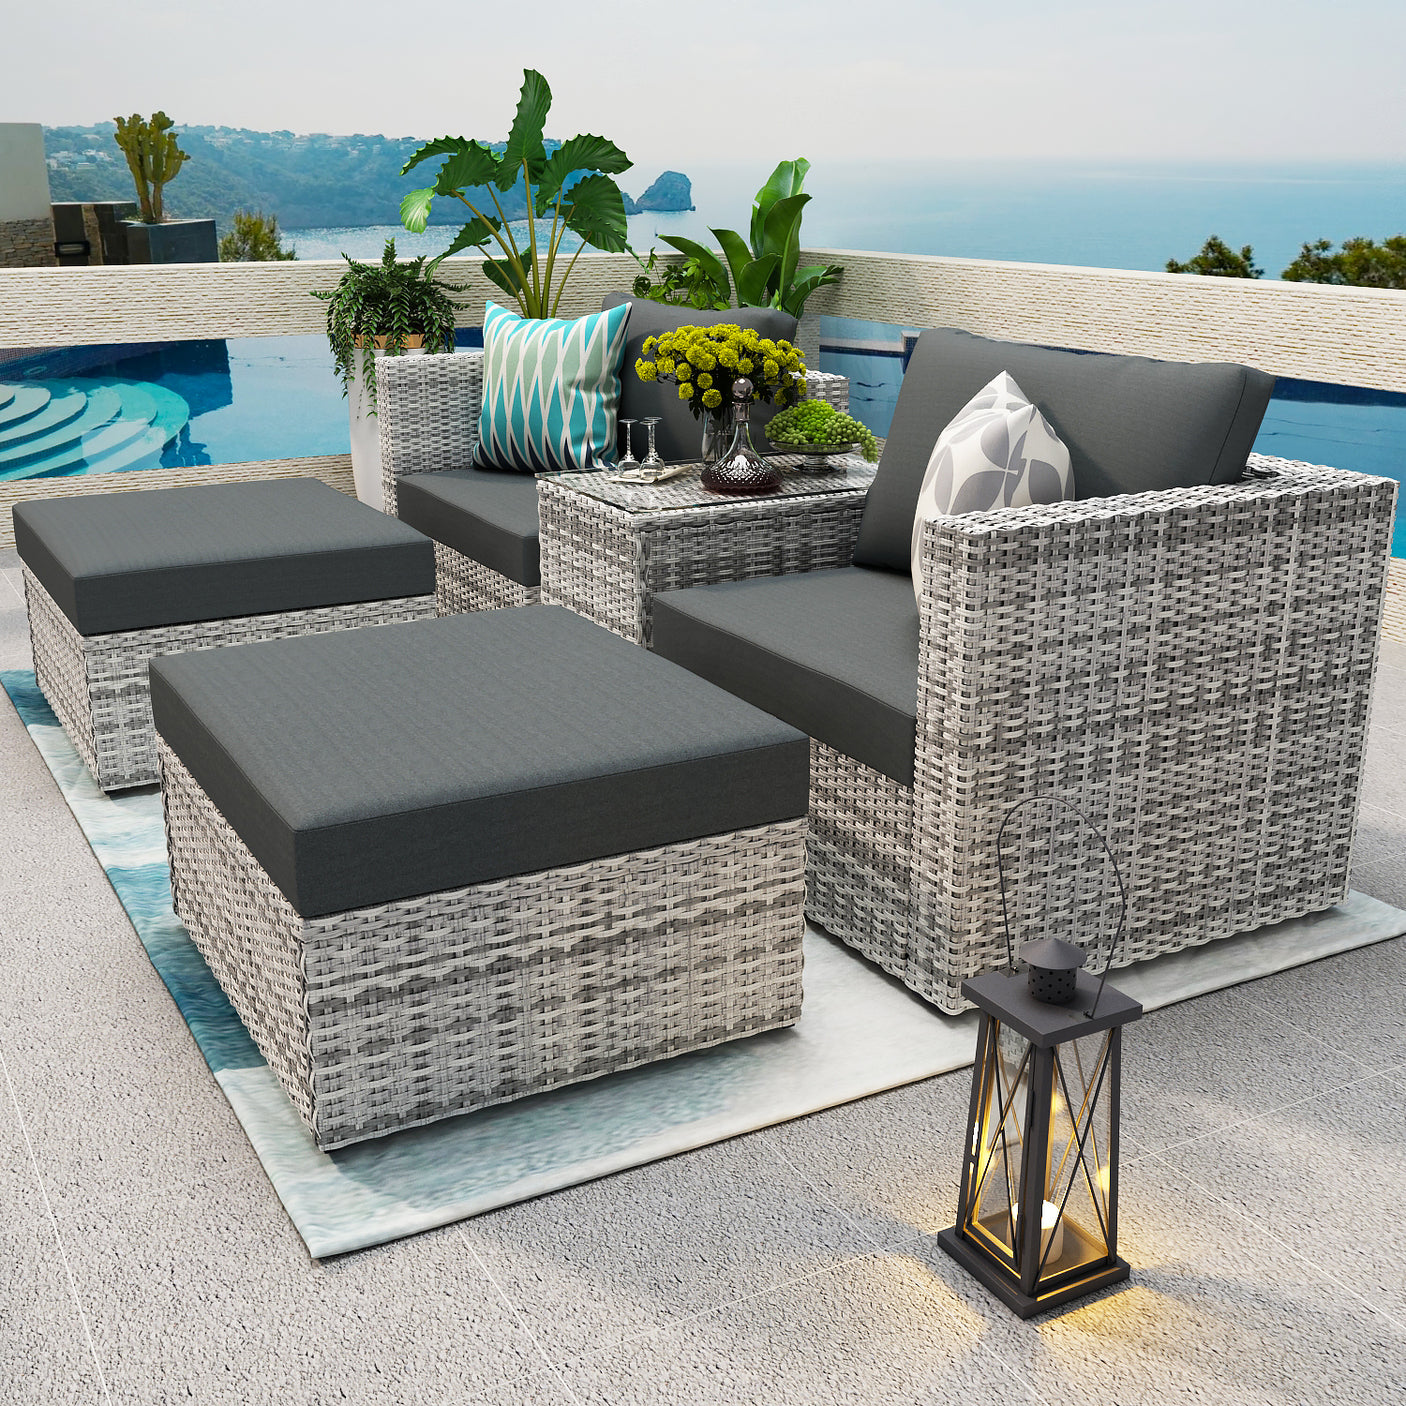 5 Pieces Wicker Sofa Set Grey Wicker+ Grey Cushion with Weather Protecting Cover